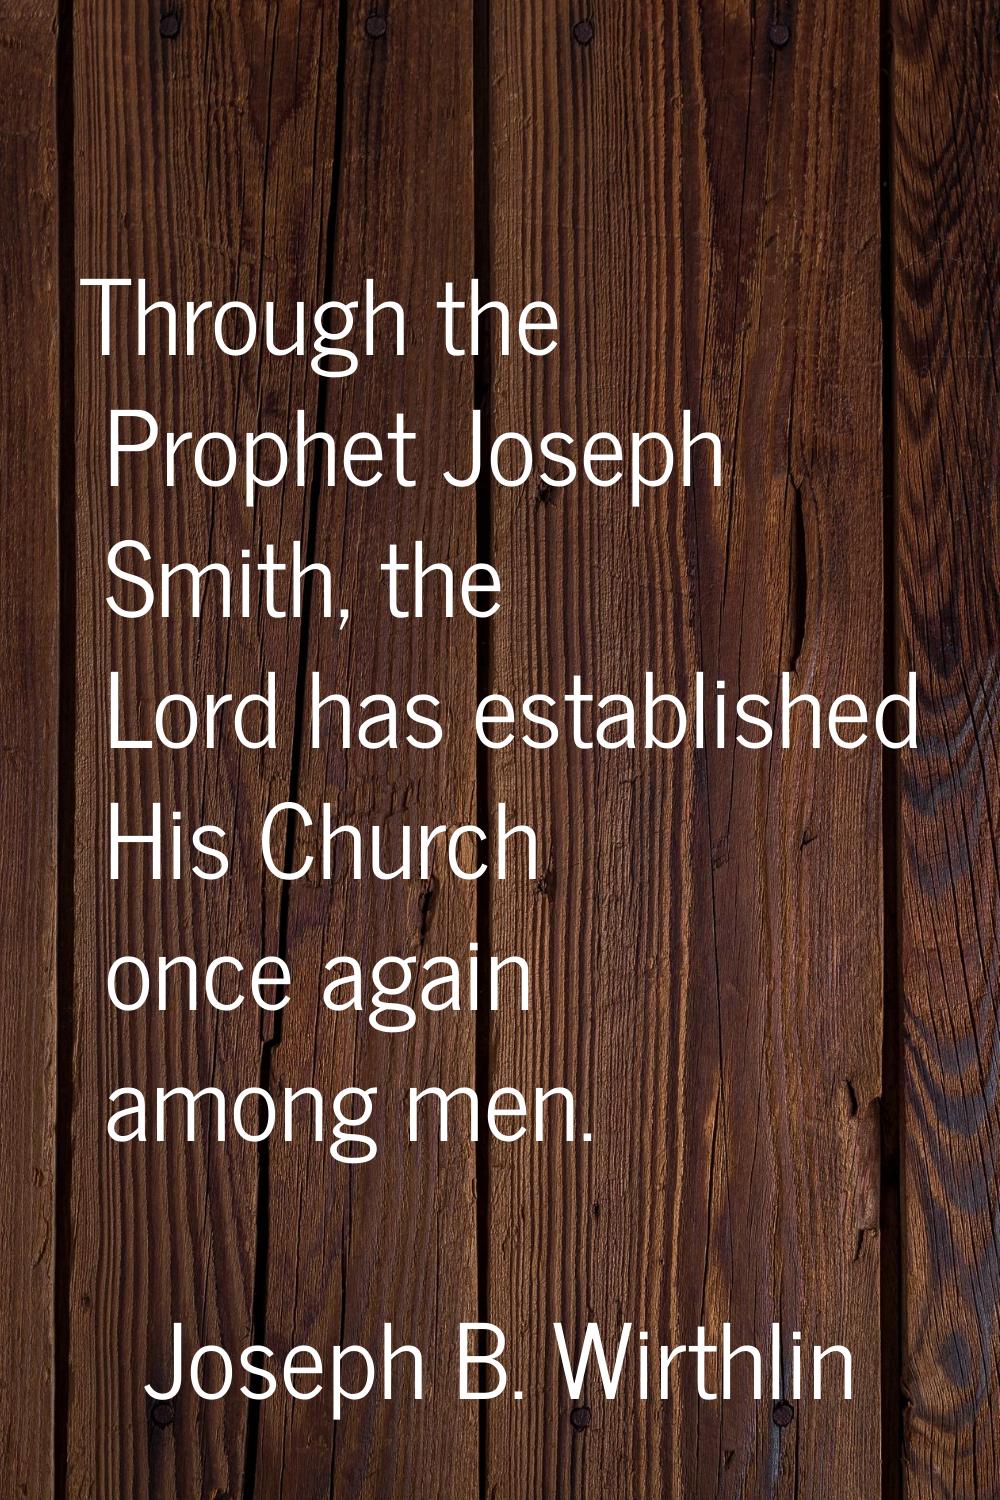 Through the Prophet Joseph Smith, the Lord has established His Church once again among men.